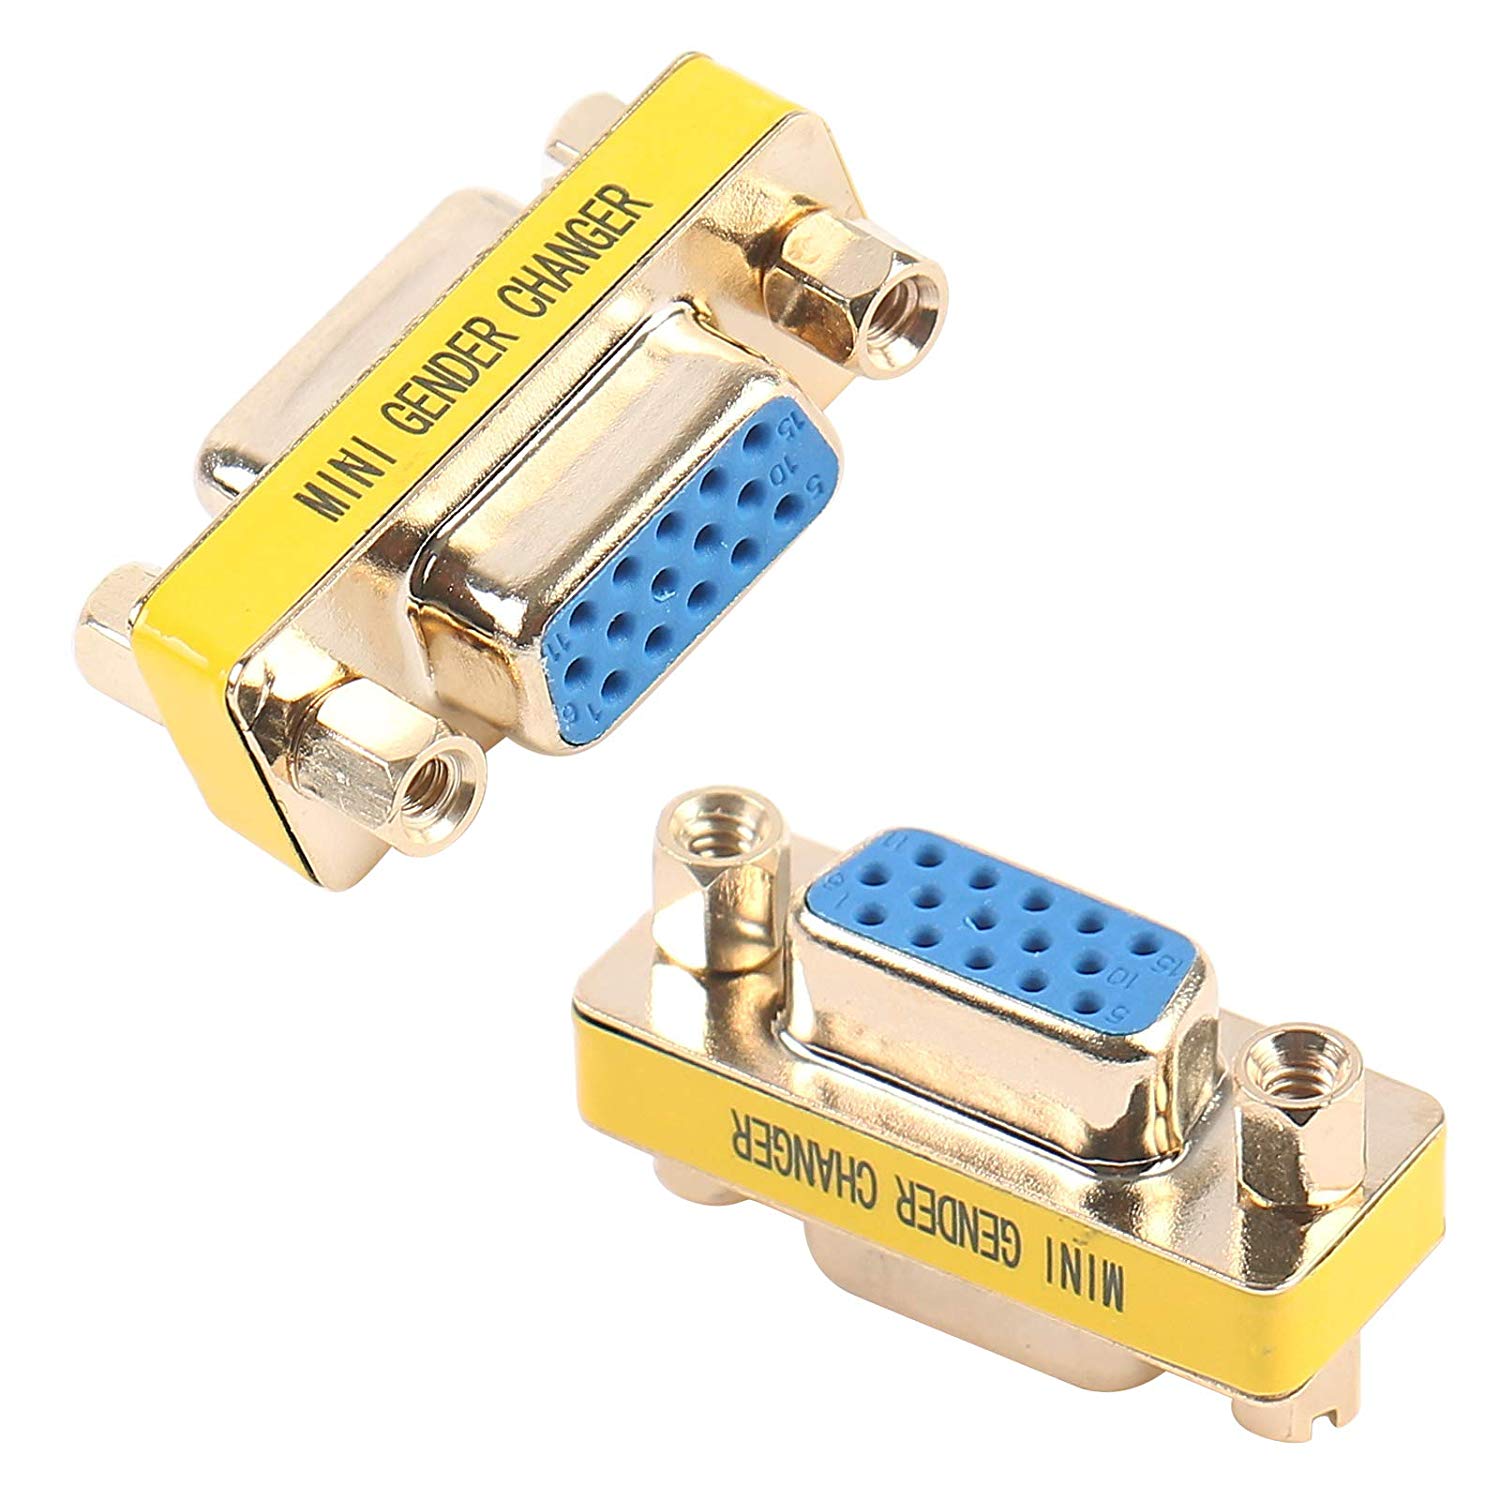 VGA Coupler Benfei 2-Pack VGA/SVGA Adapter HD15 Female to Female Gender with Gold - Plated Cord.